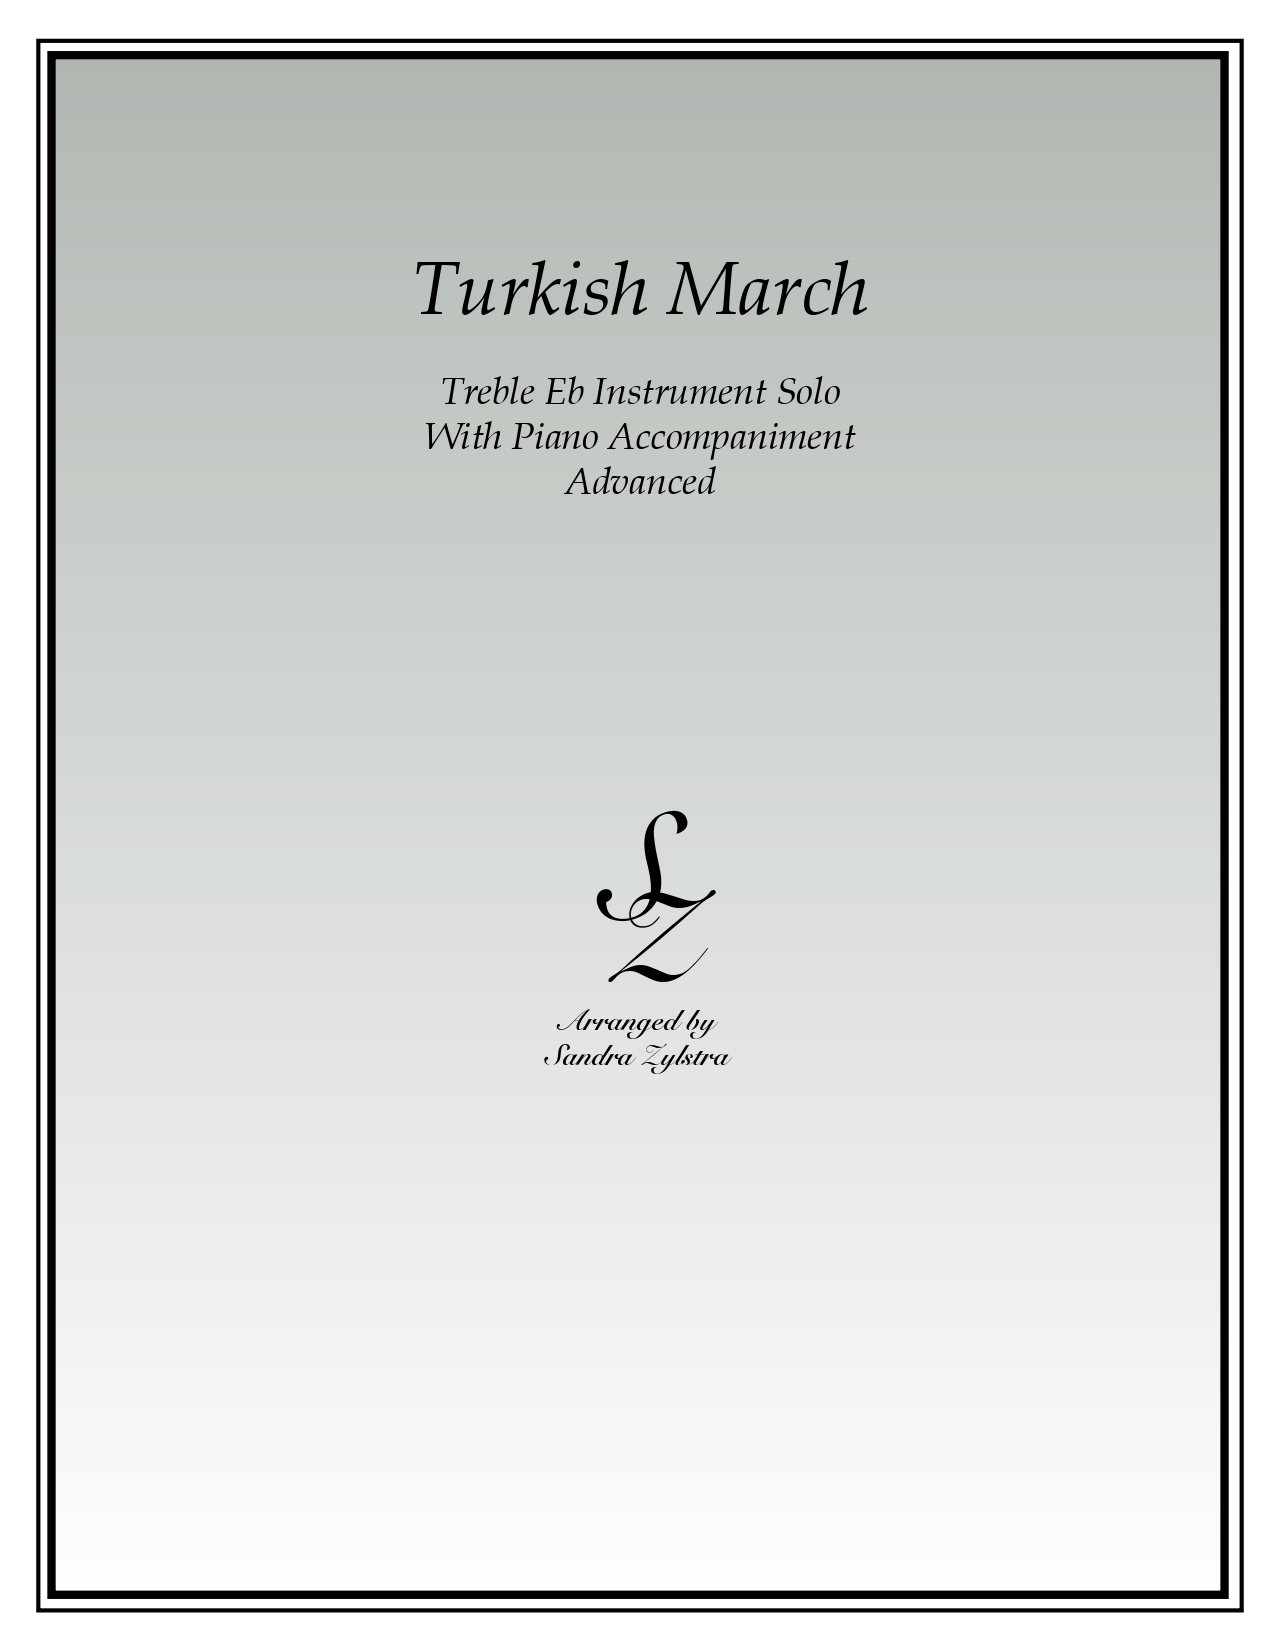 Turkish March Eb instrument solo part cover page 00011